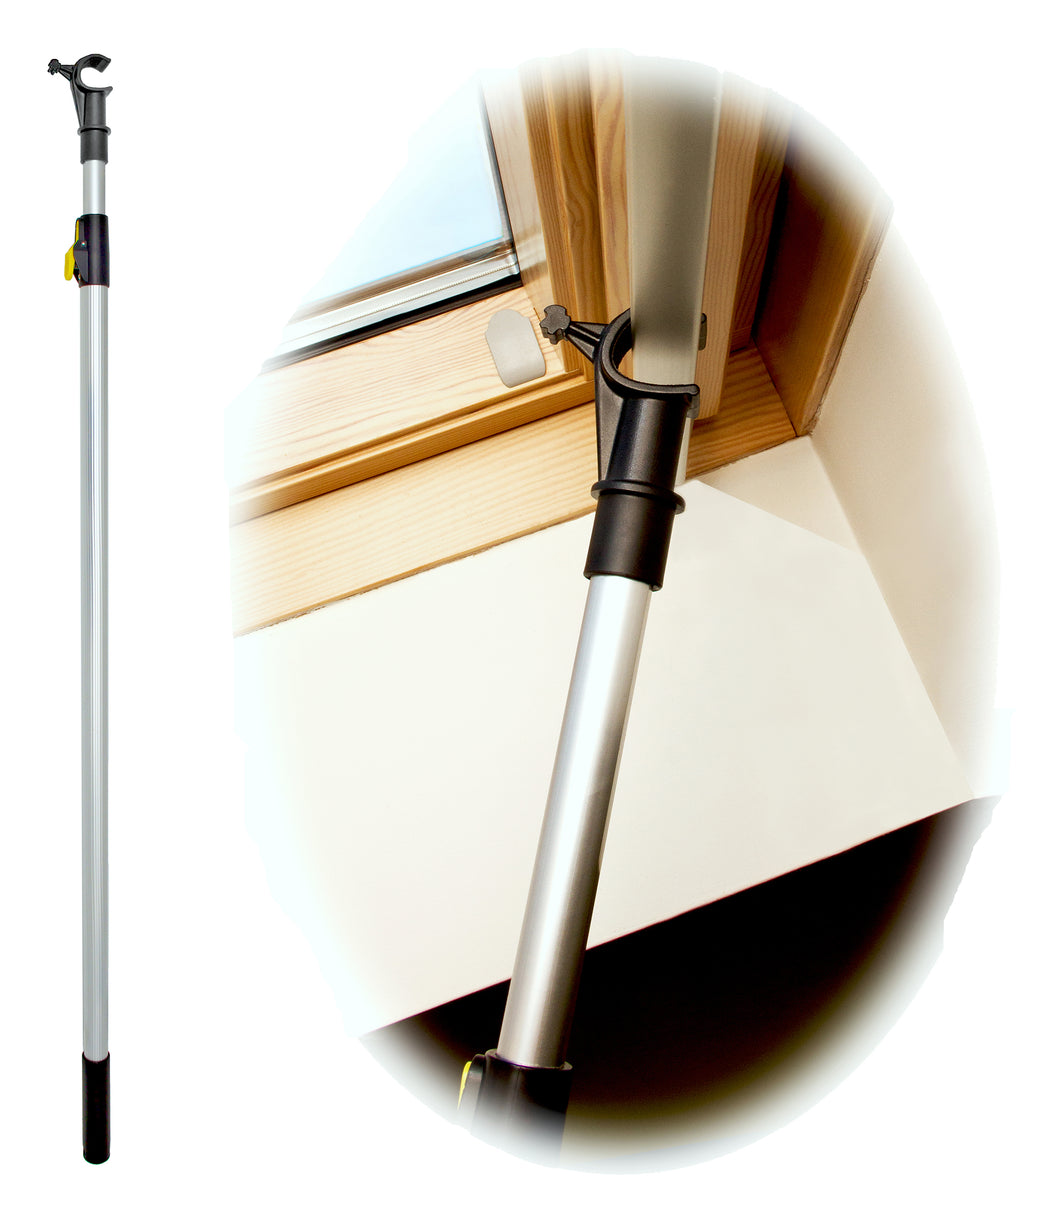 WinHux Window Pole 1.2-2.0 metre Silver  (Only available via Amazon - Contact us for Bulk orders)